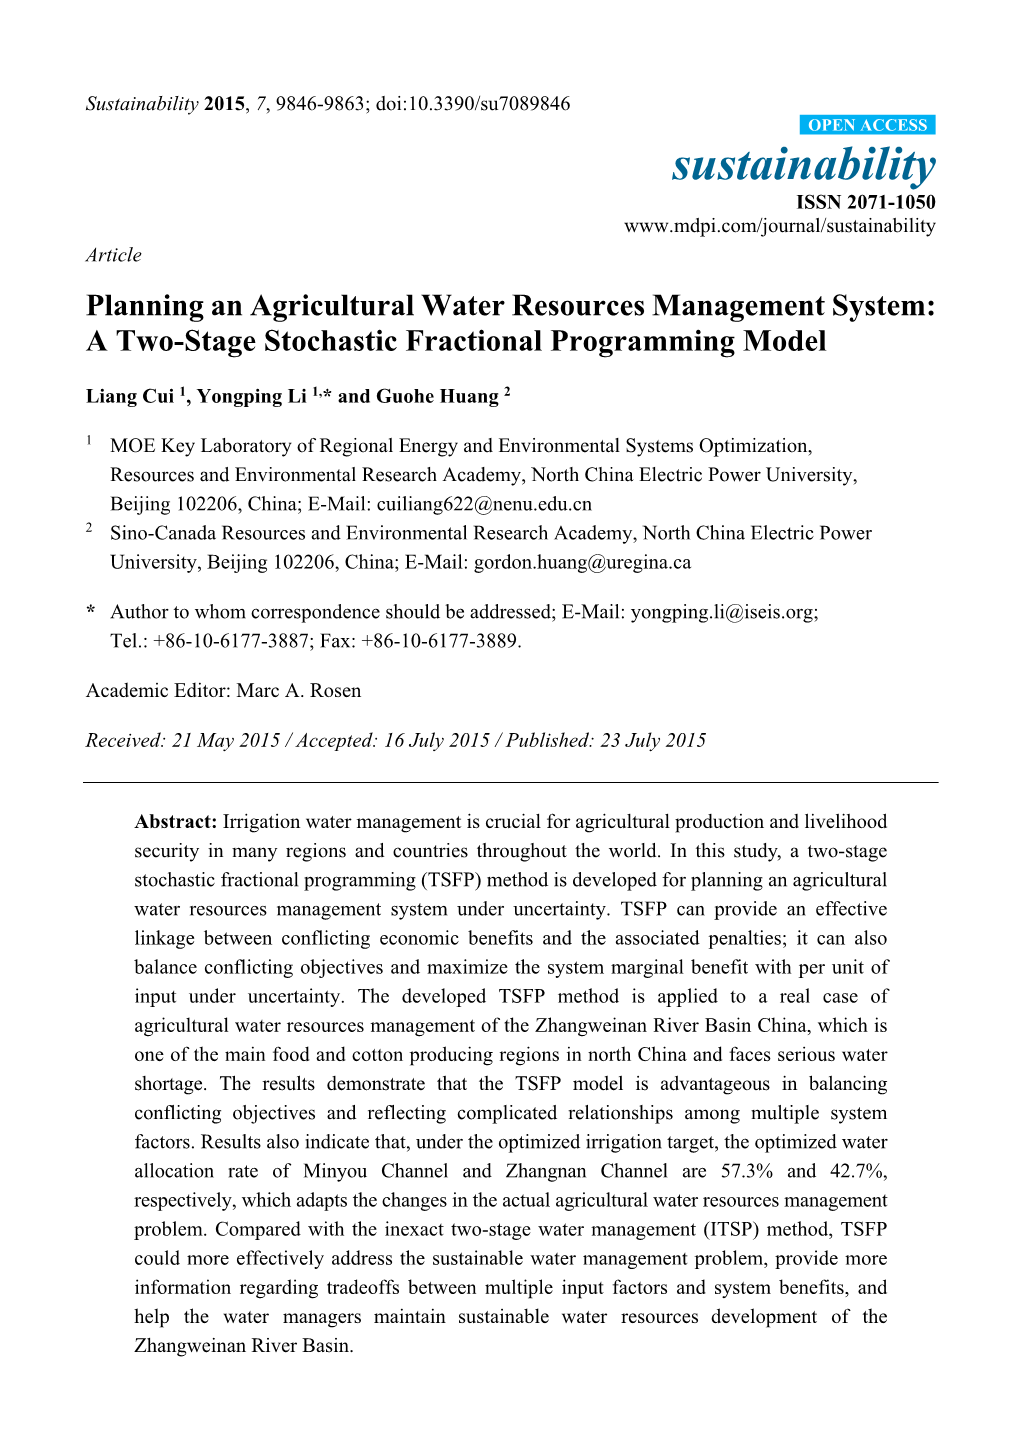 Planning an Agricultural Water Resources Management System: a Two-Stage Stochastic Fractional Programming Model